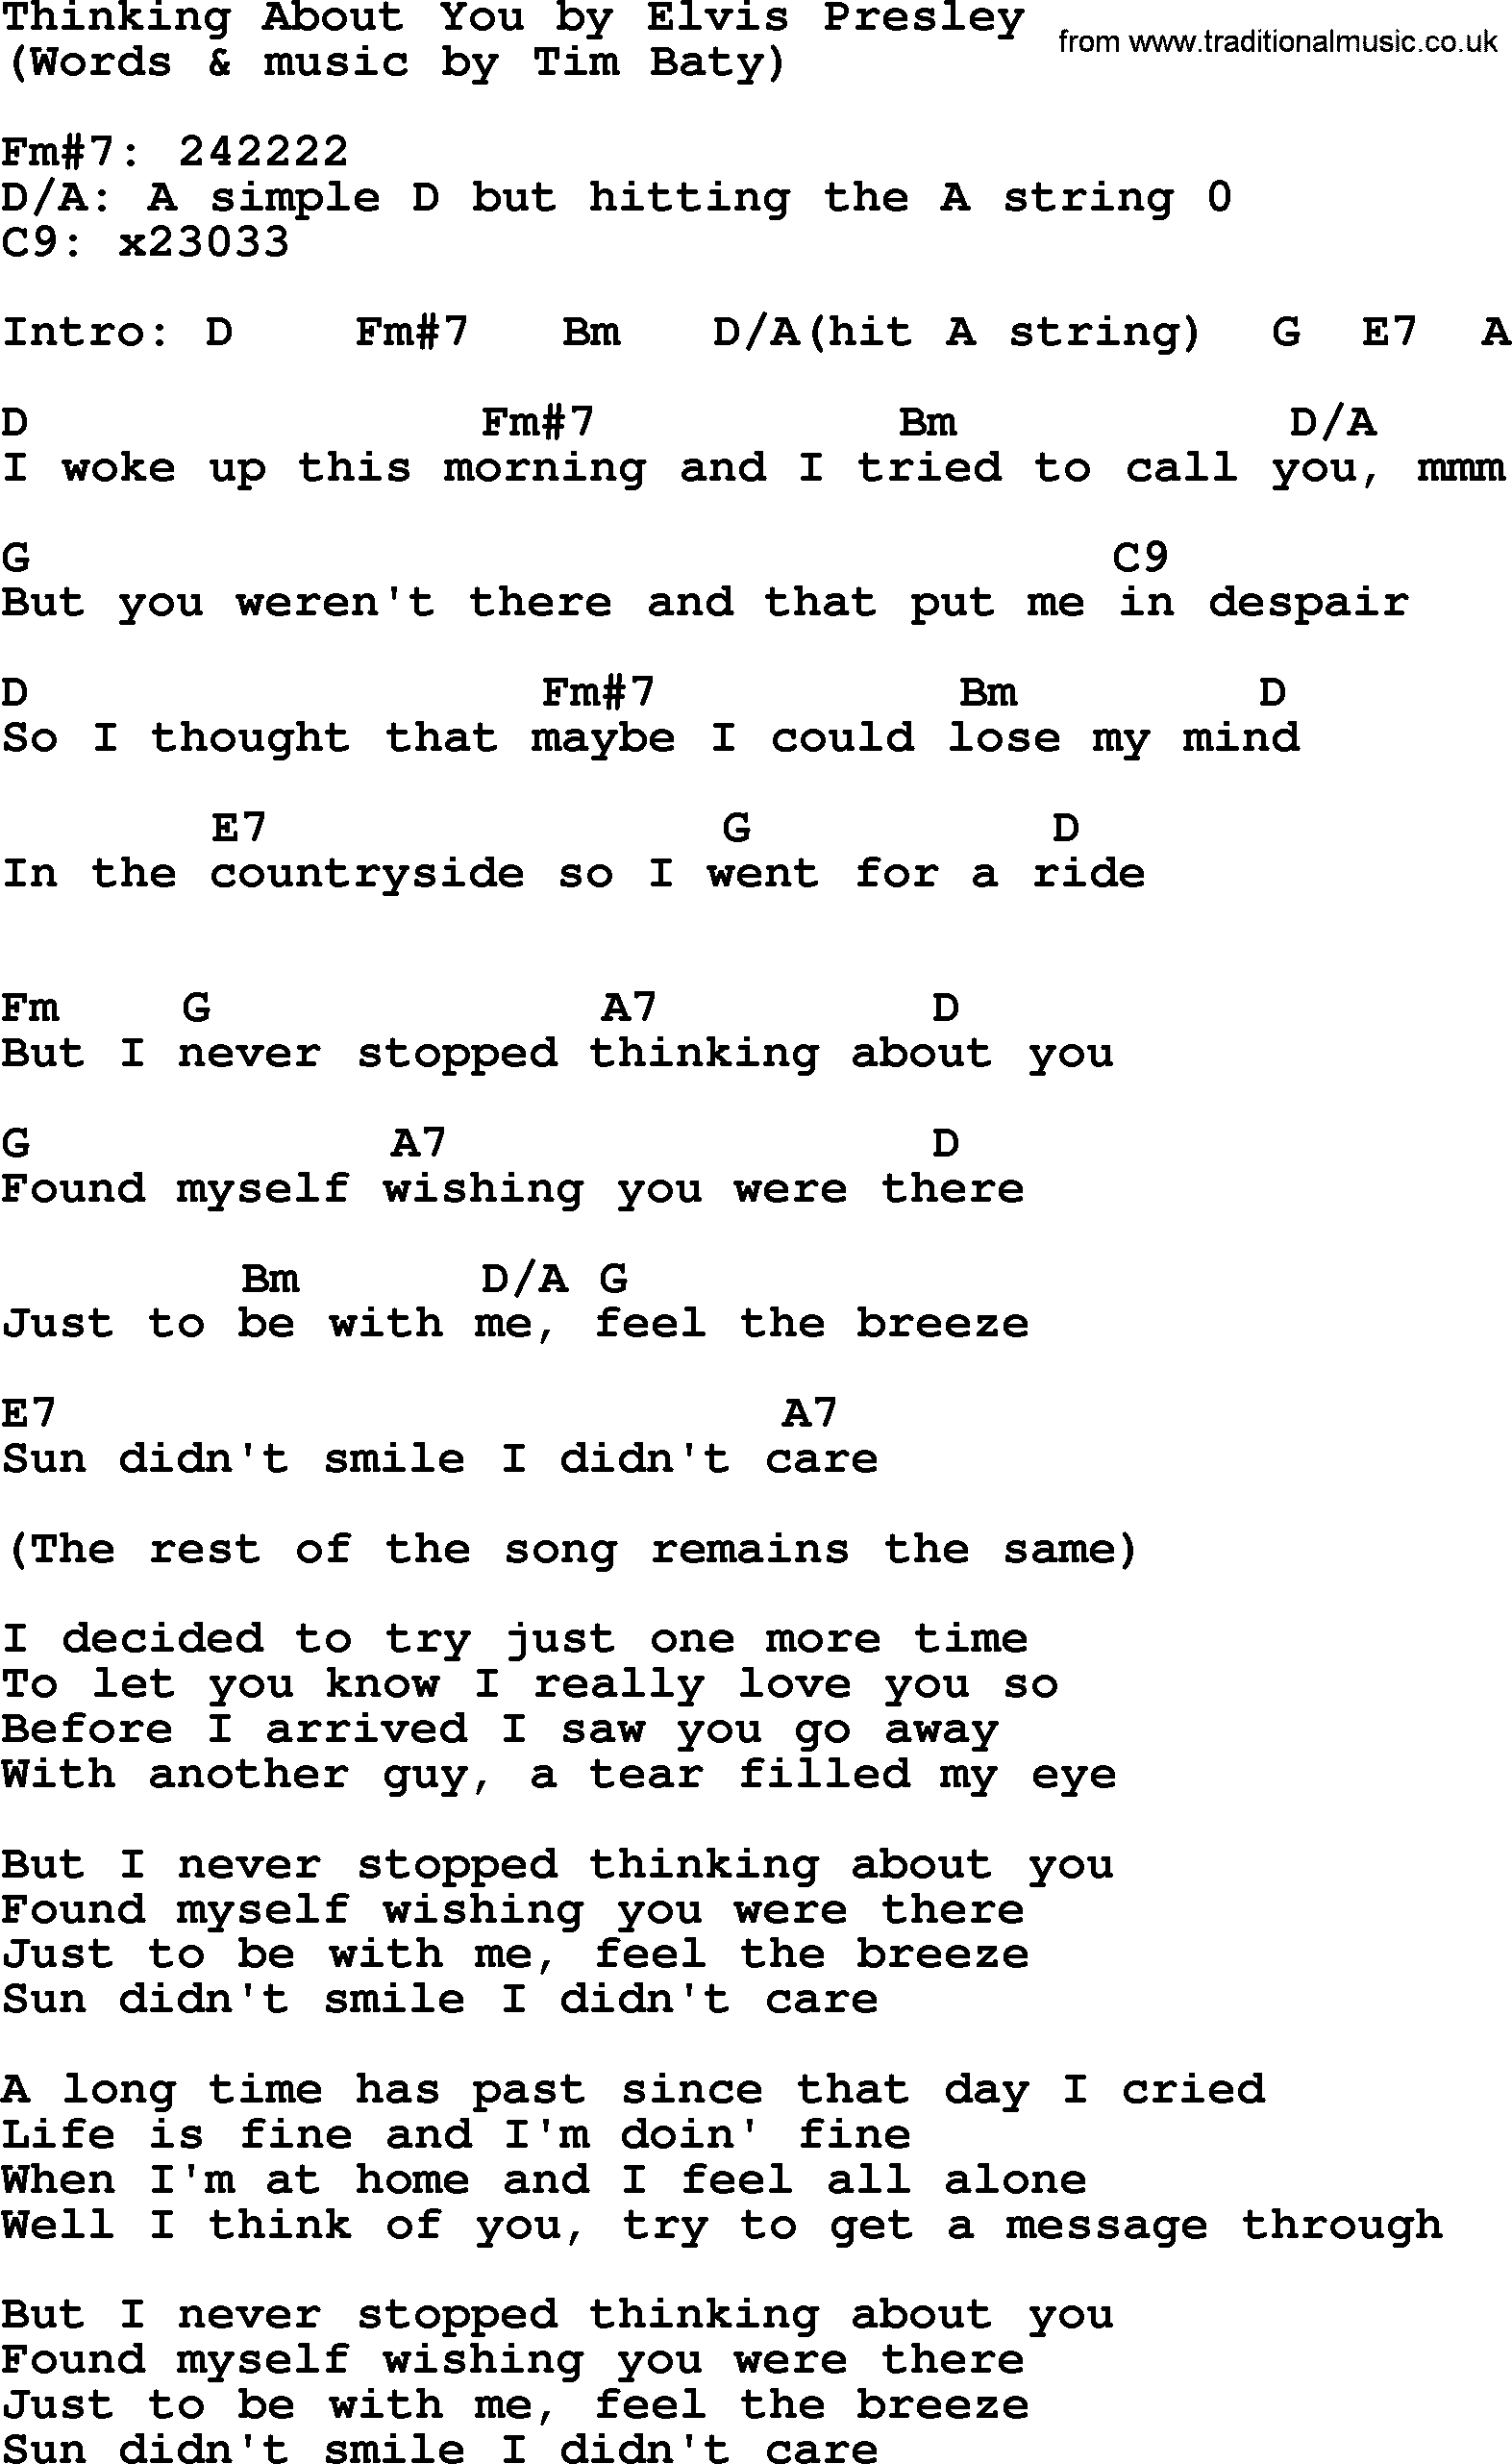 Elvis Presley song: Thinking About You, lyrics and chords